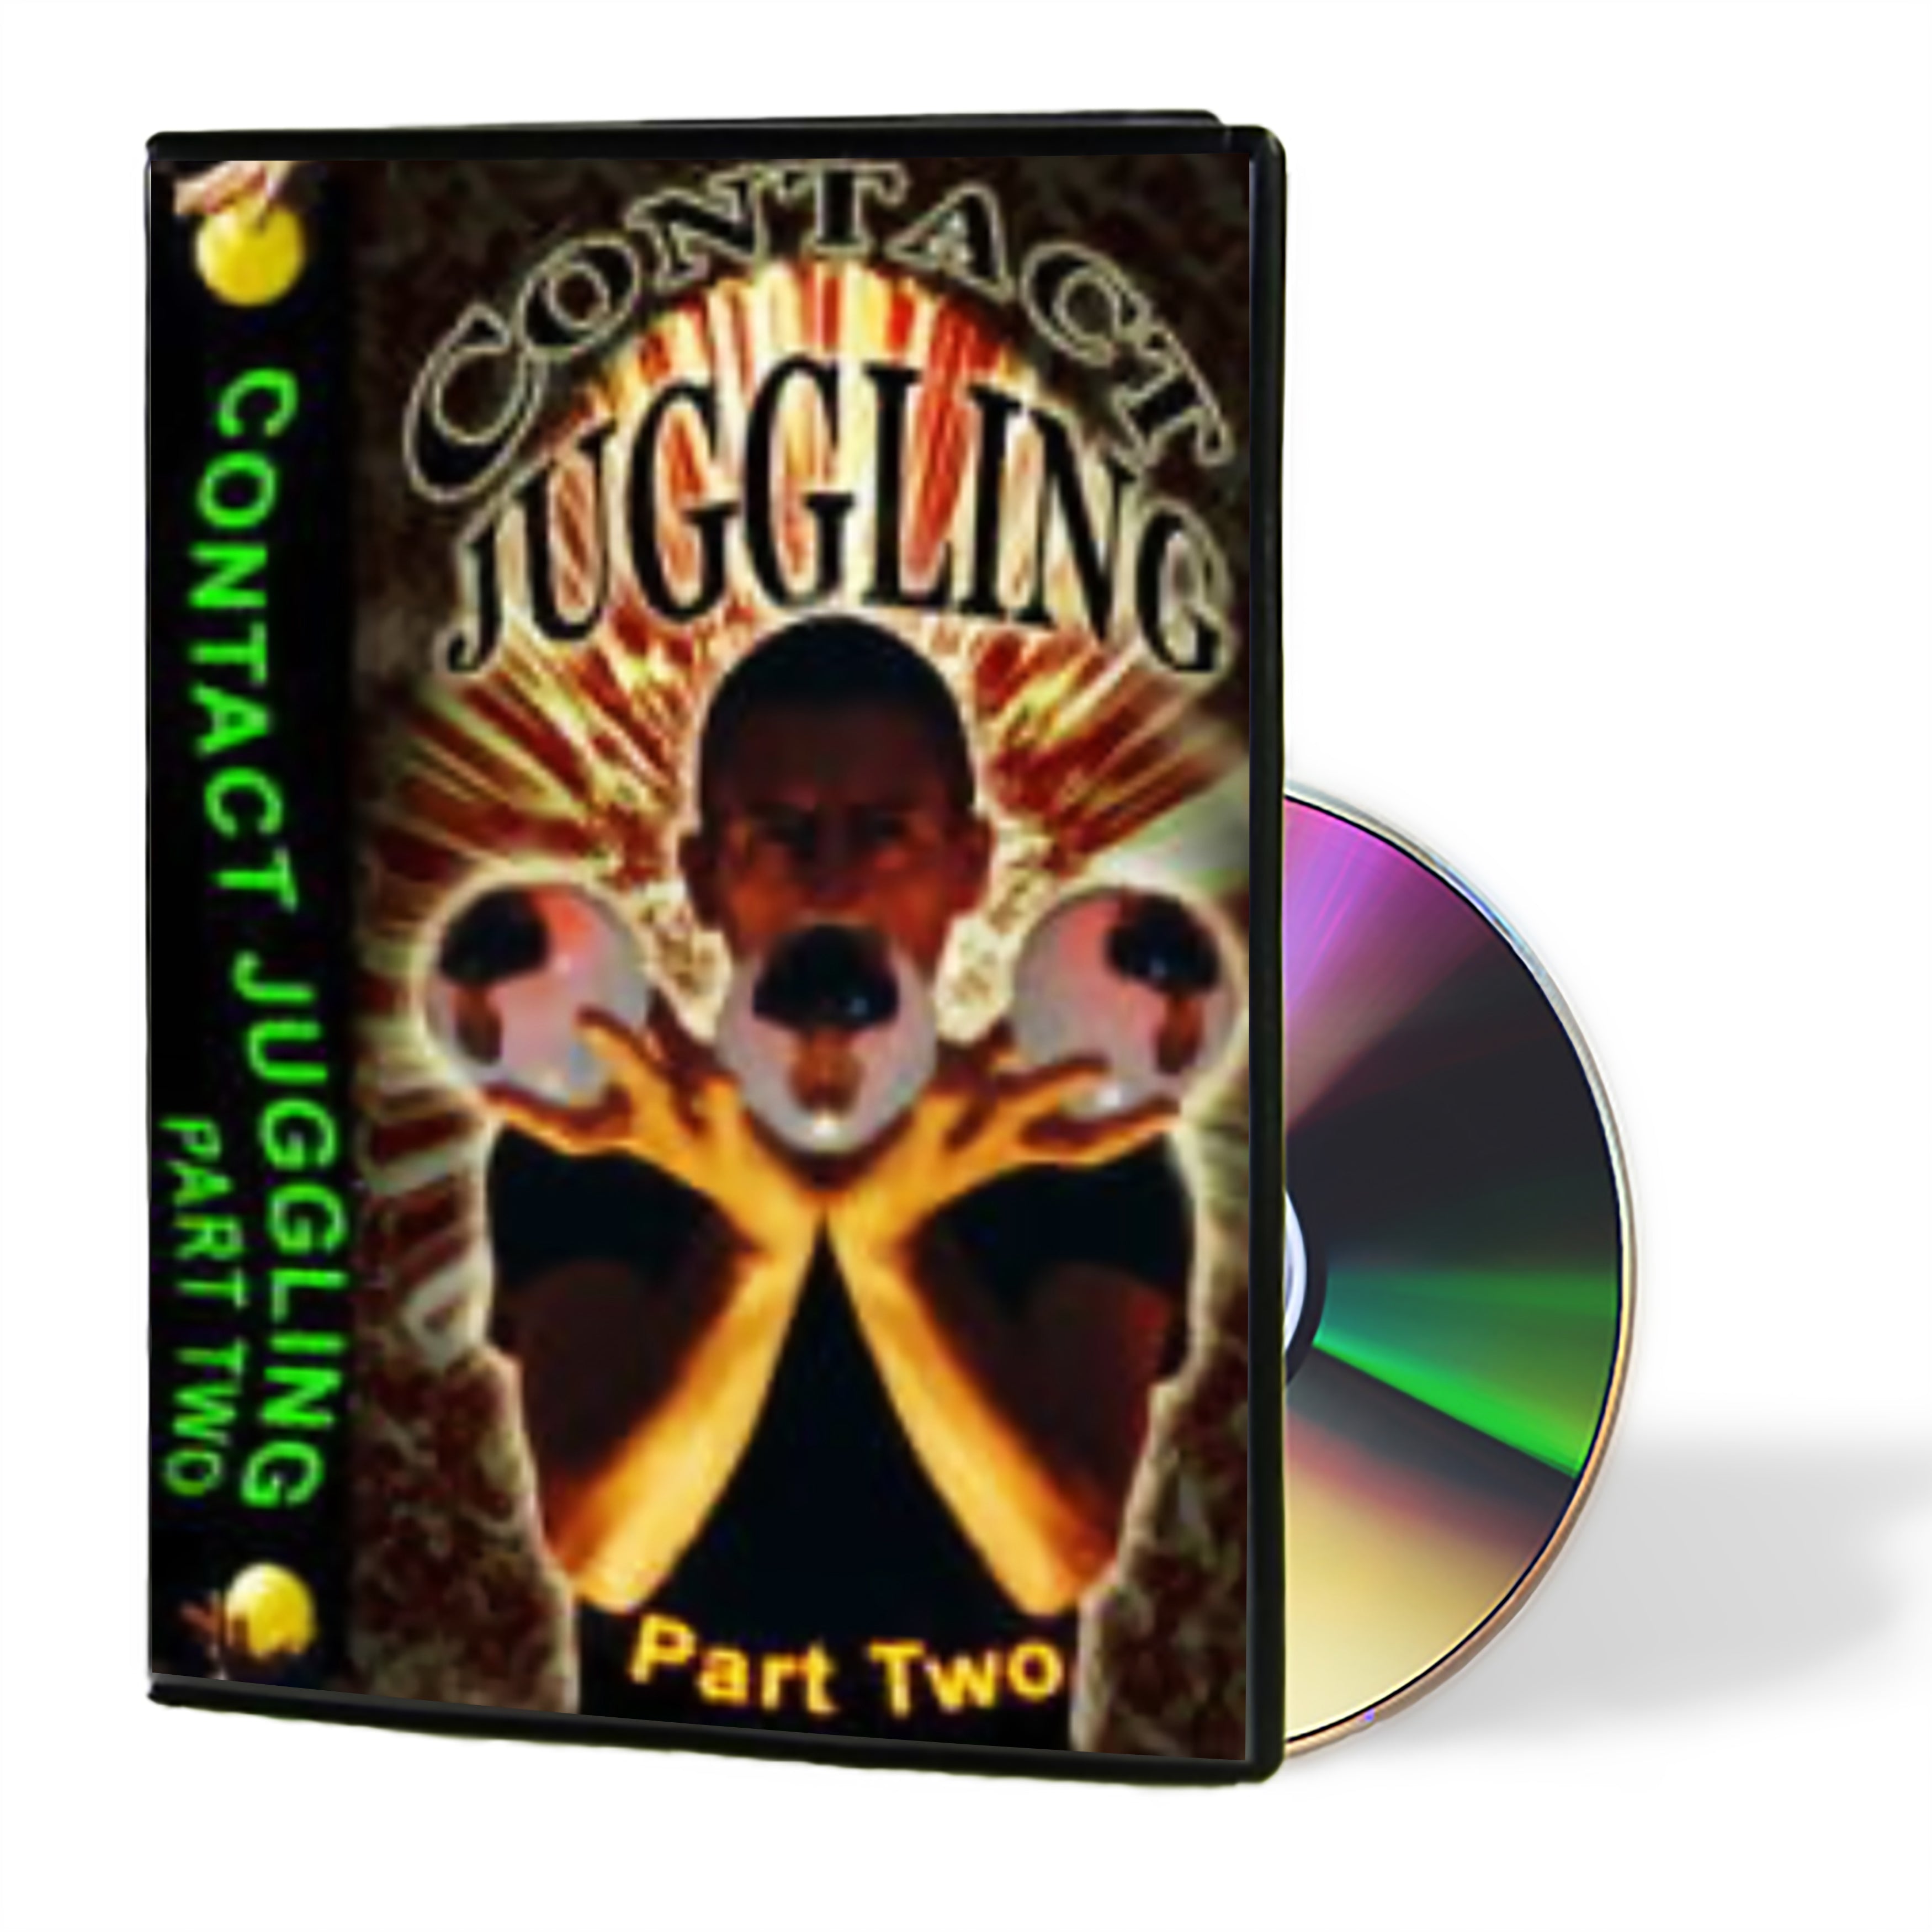 Contact Juggling DVD Part Two